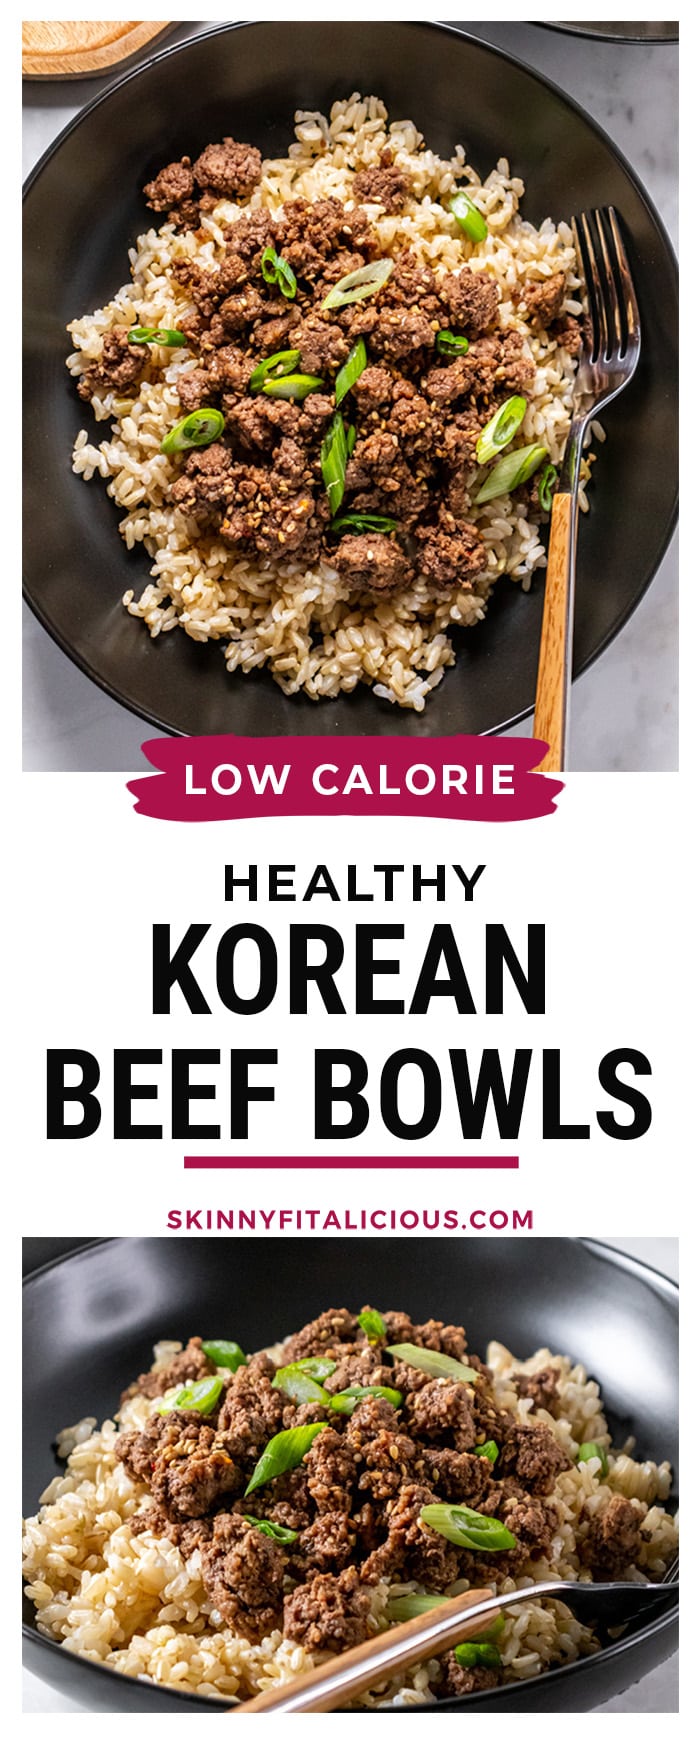 Healthy Korean Beef Bowls are a nutritious low calorie meal. Simple to make and tasty so the whole family can enjoy it too!